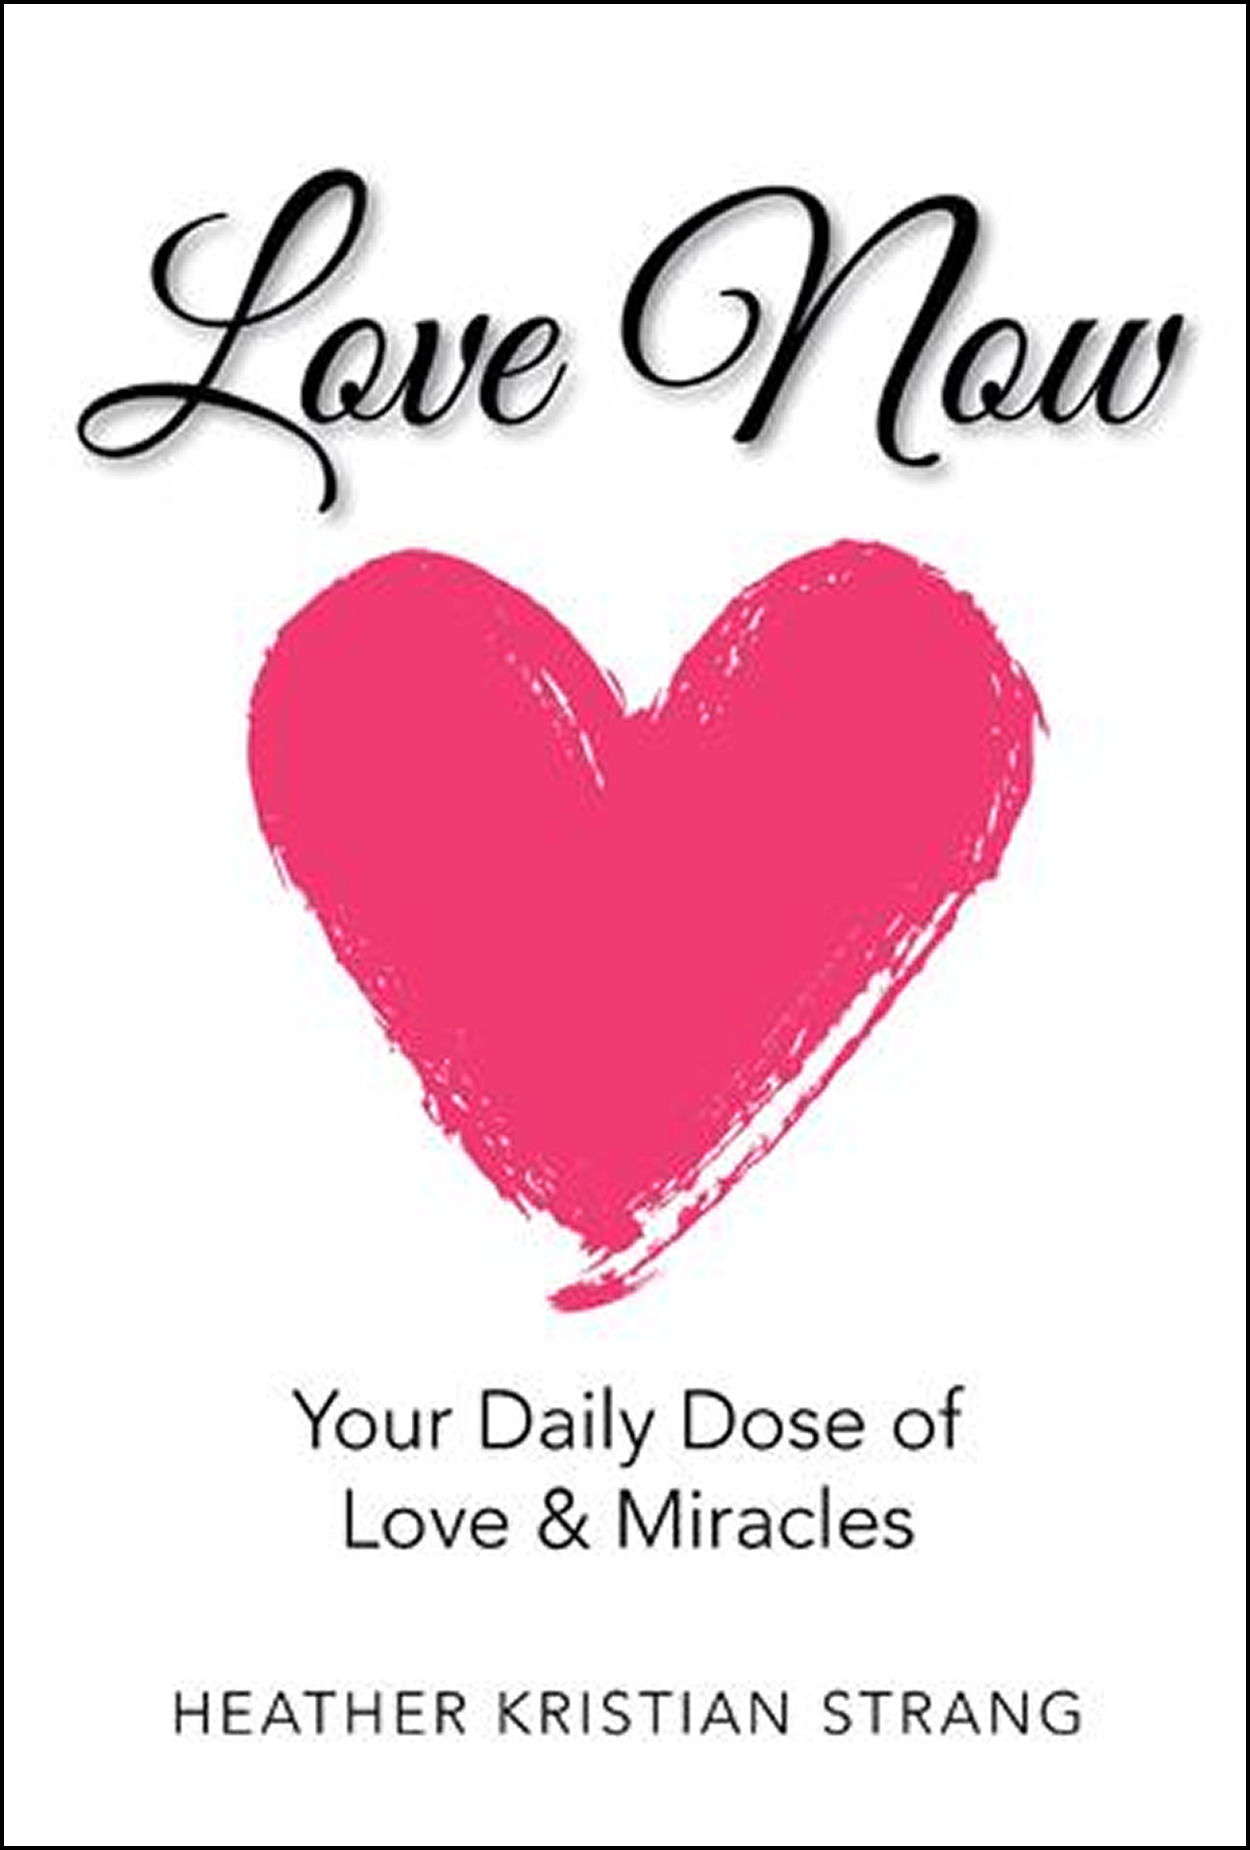 book-love-now-2